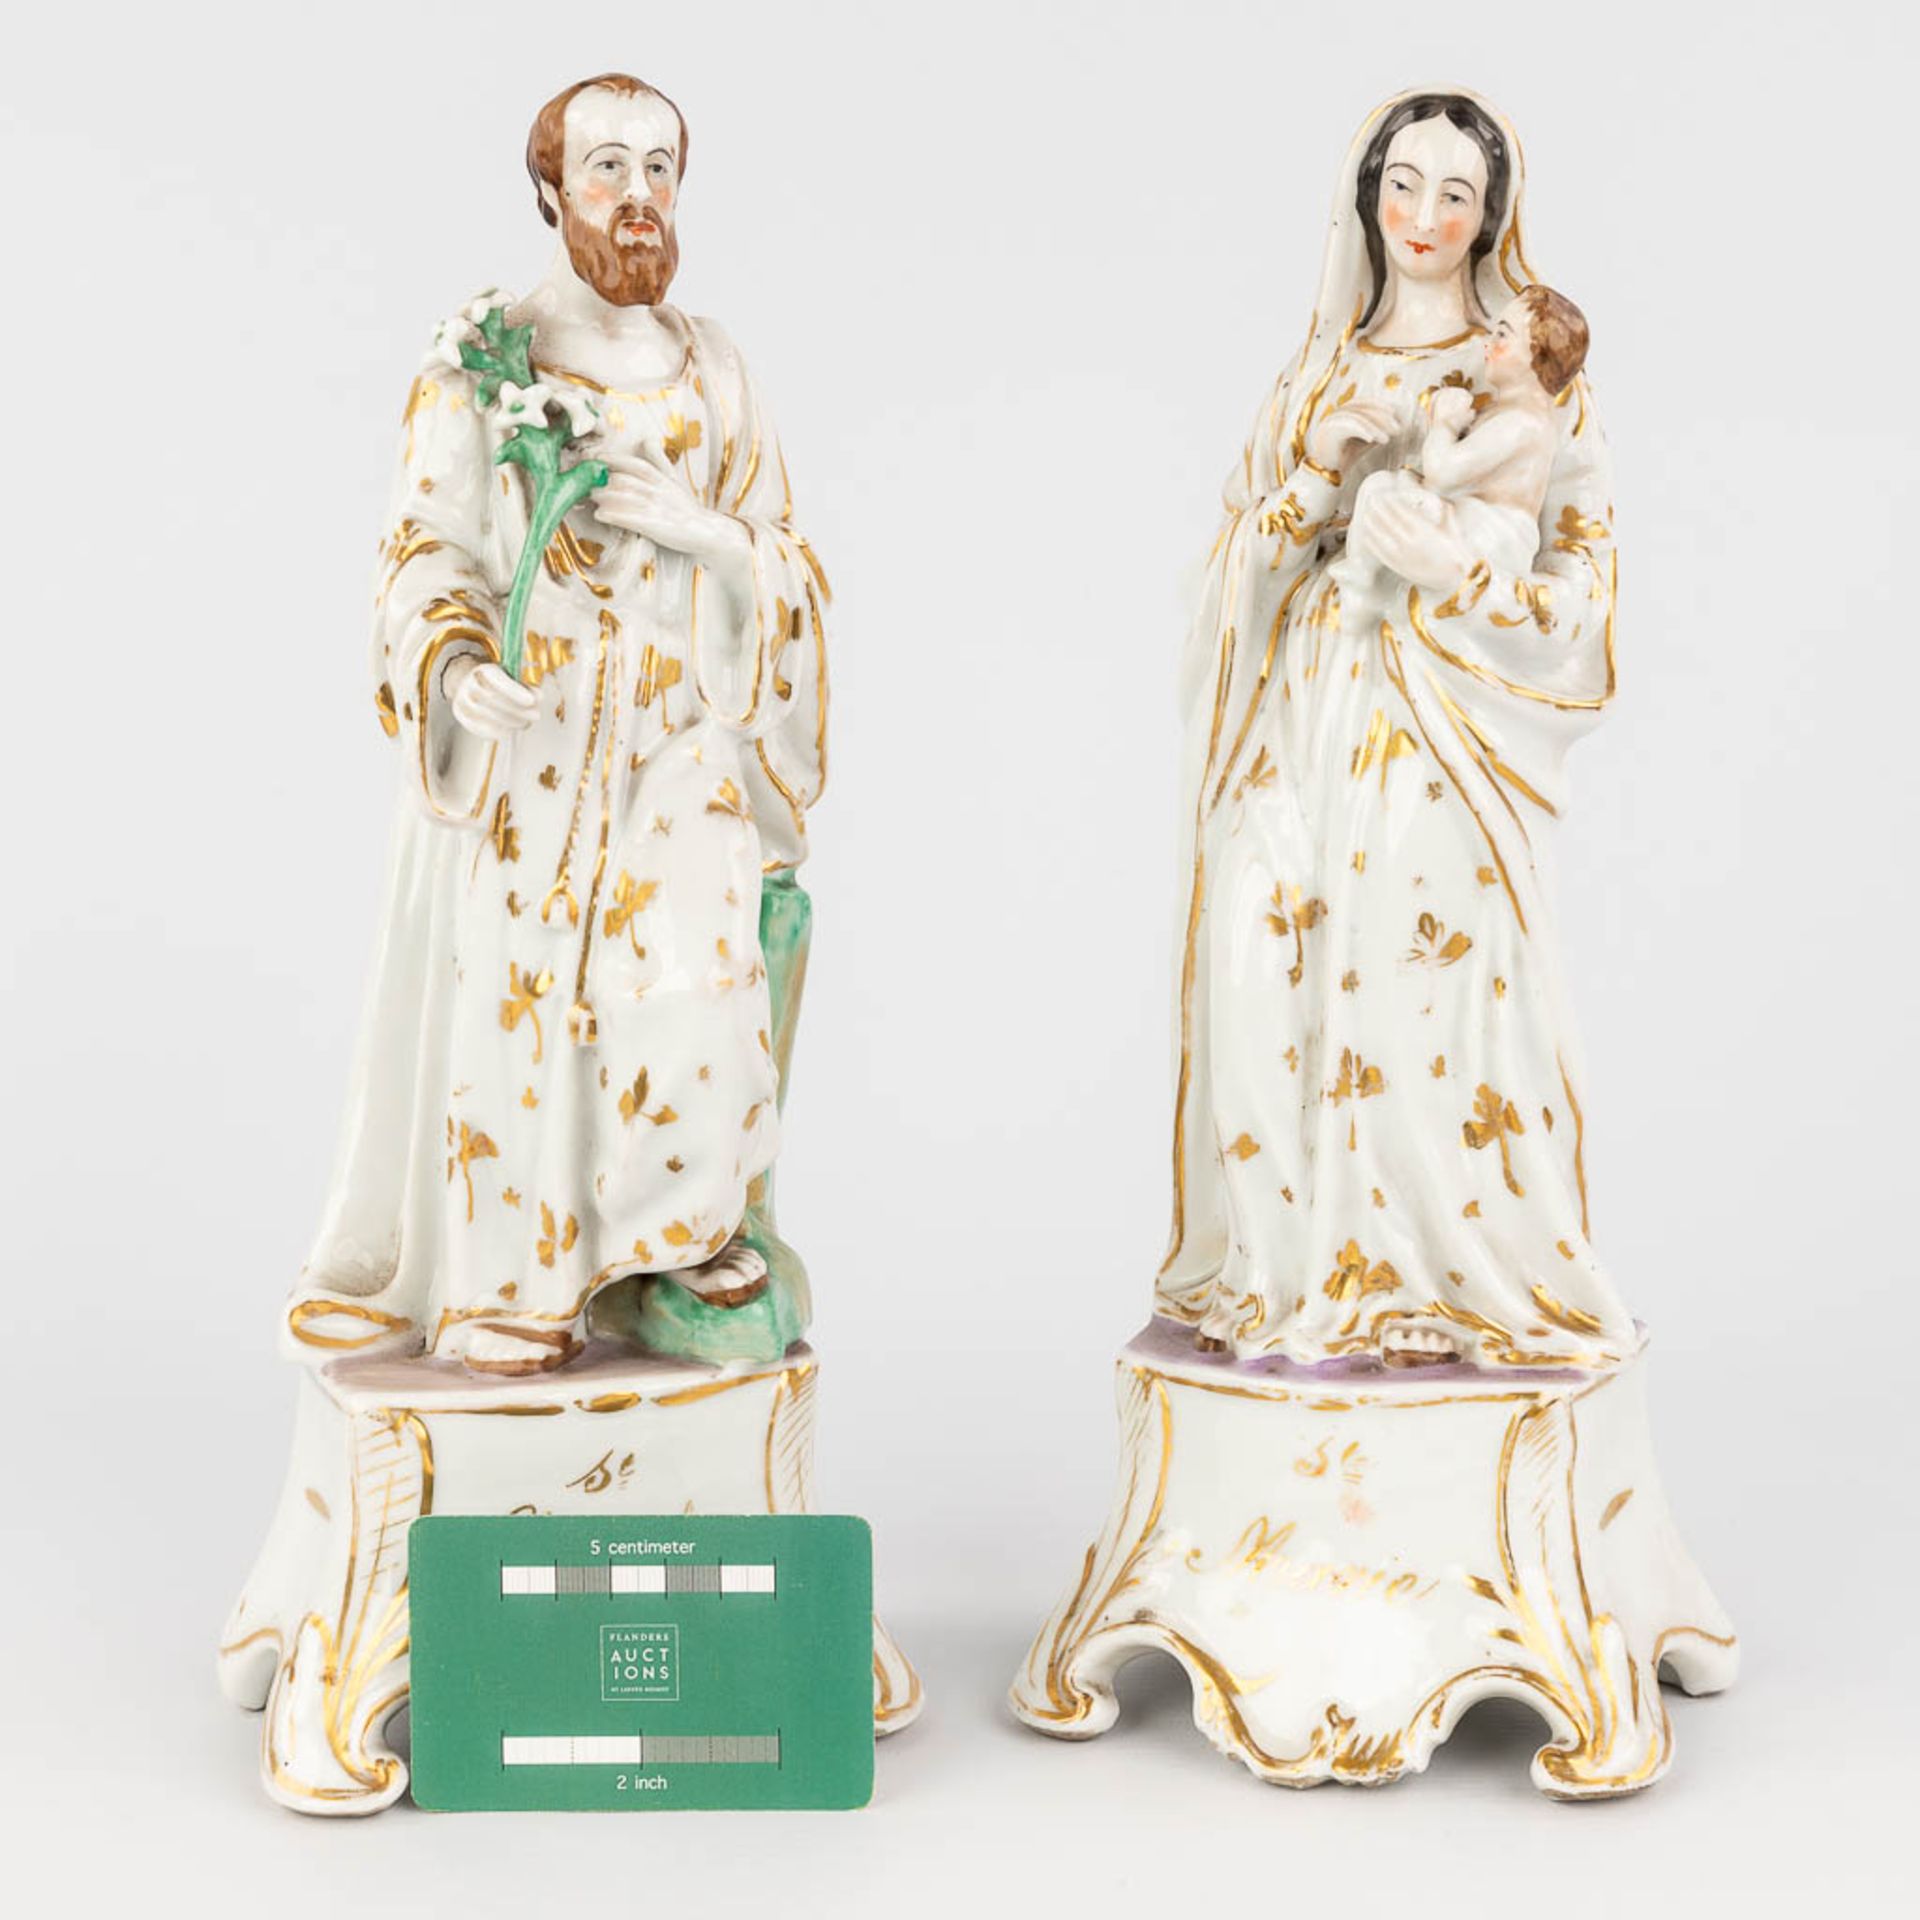 A porcelain figurine of Mary and Joseph, made in Andenne, Belgium. (H: 32 cm) - Image 2 of 13